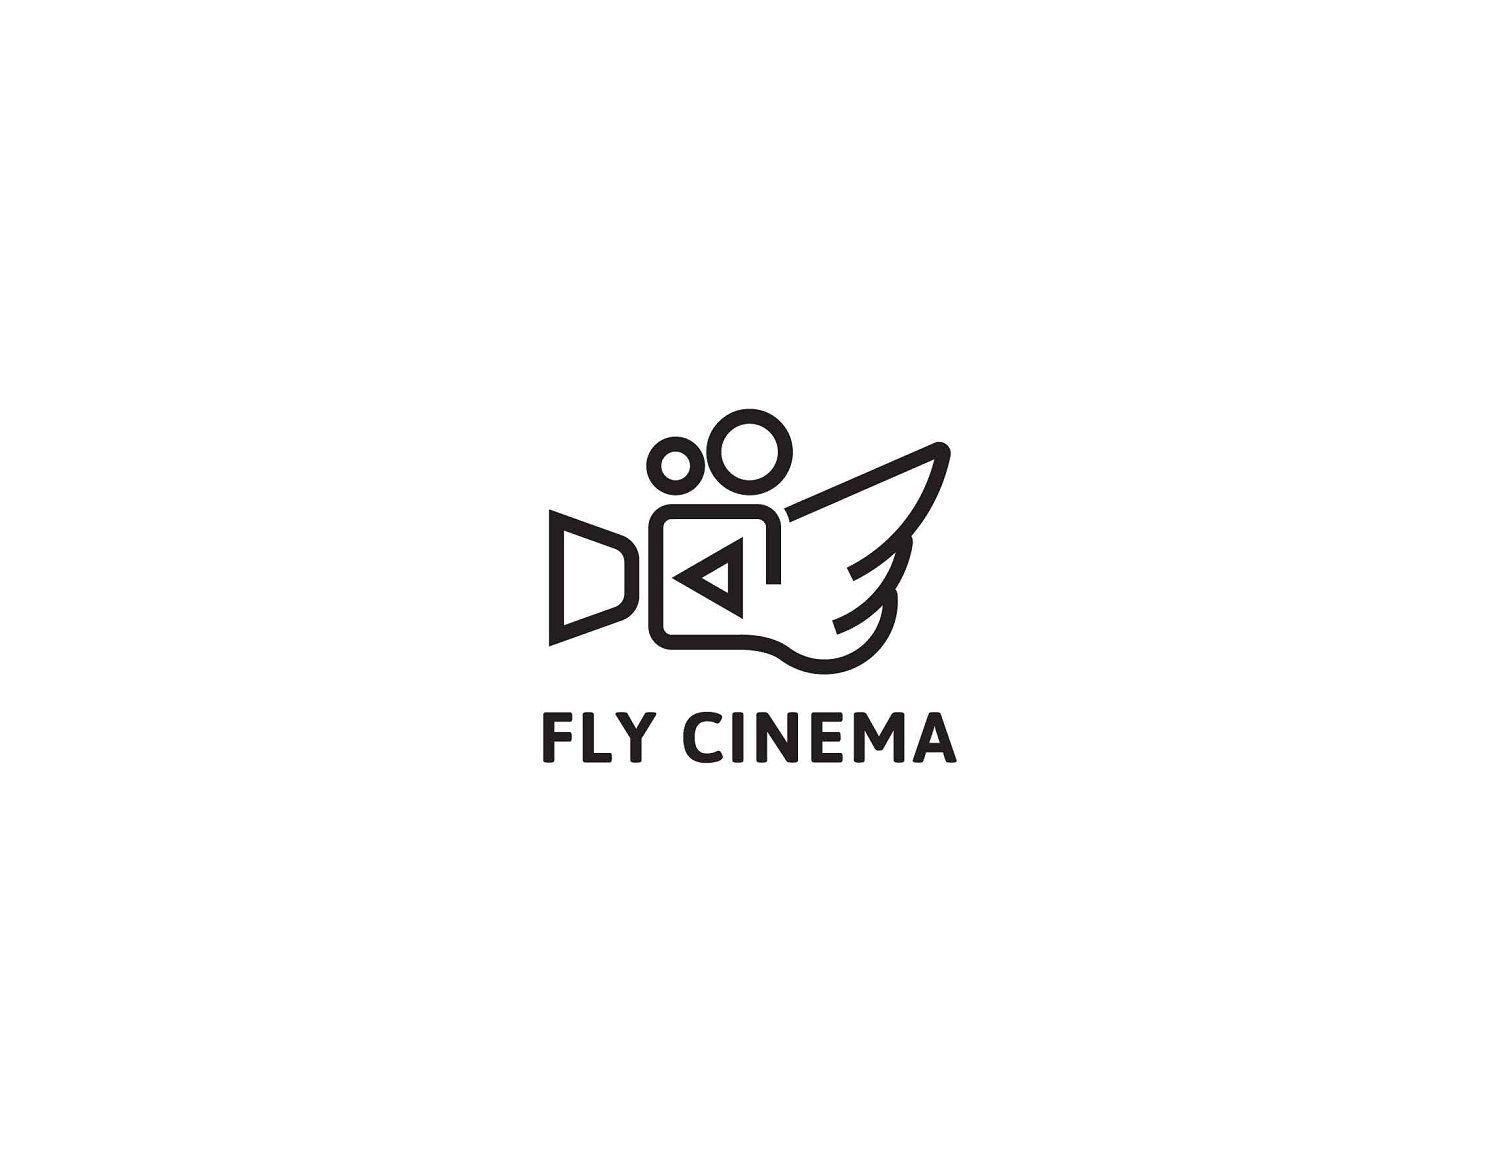 Film Production Logo - Traditional, Masculine, Film Production Logo Design for Fly Cinema ...